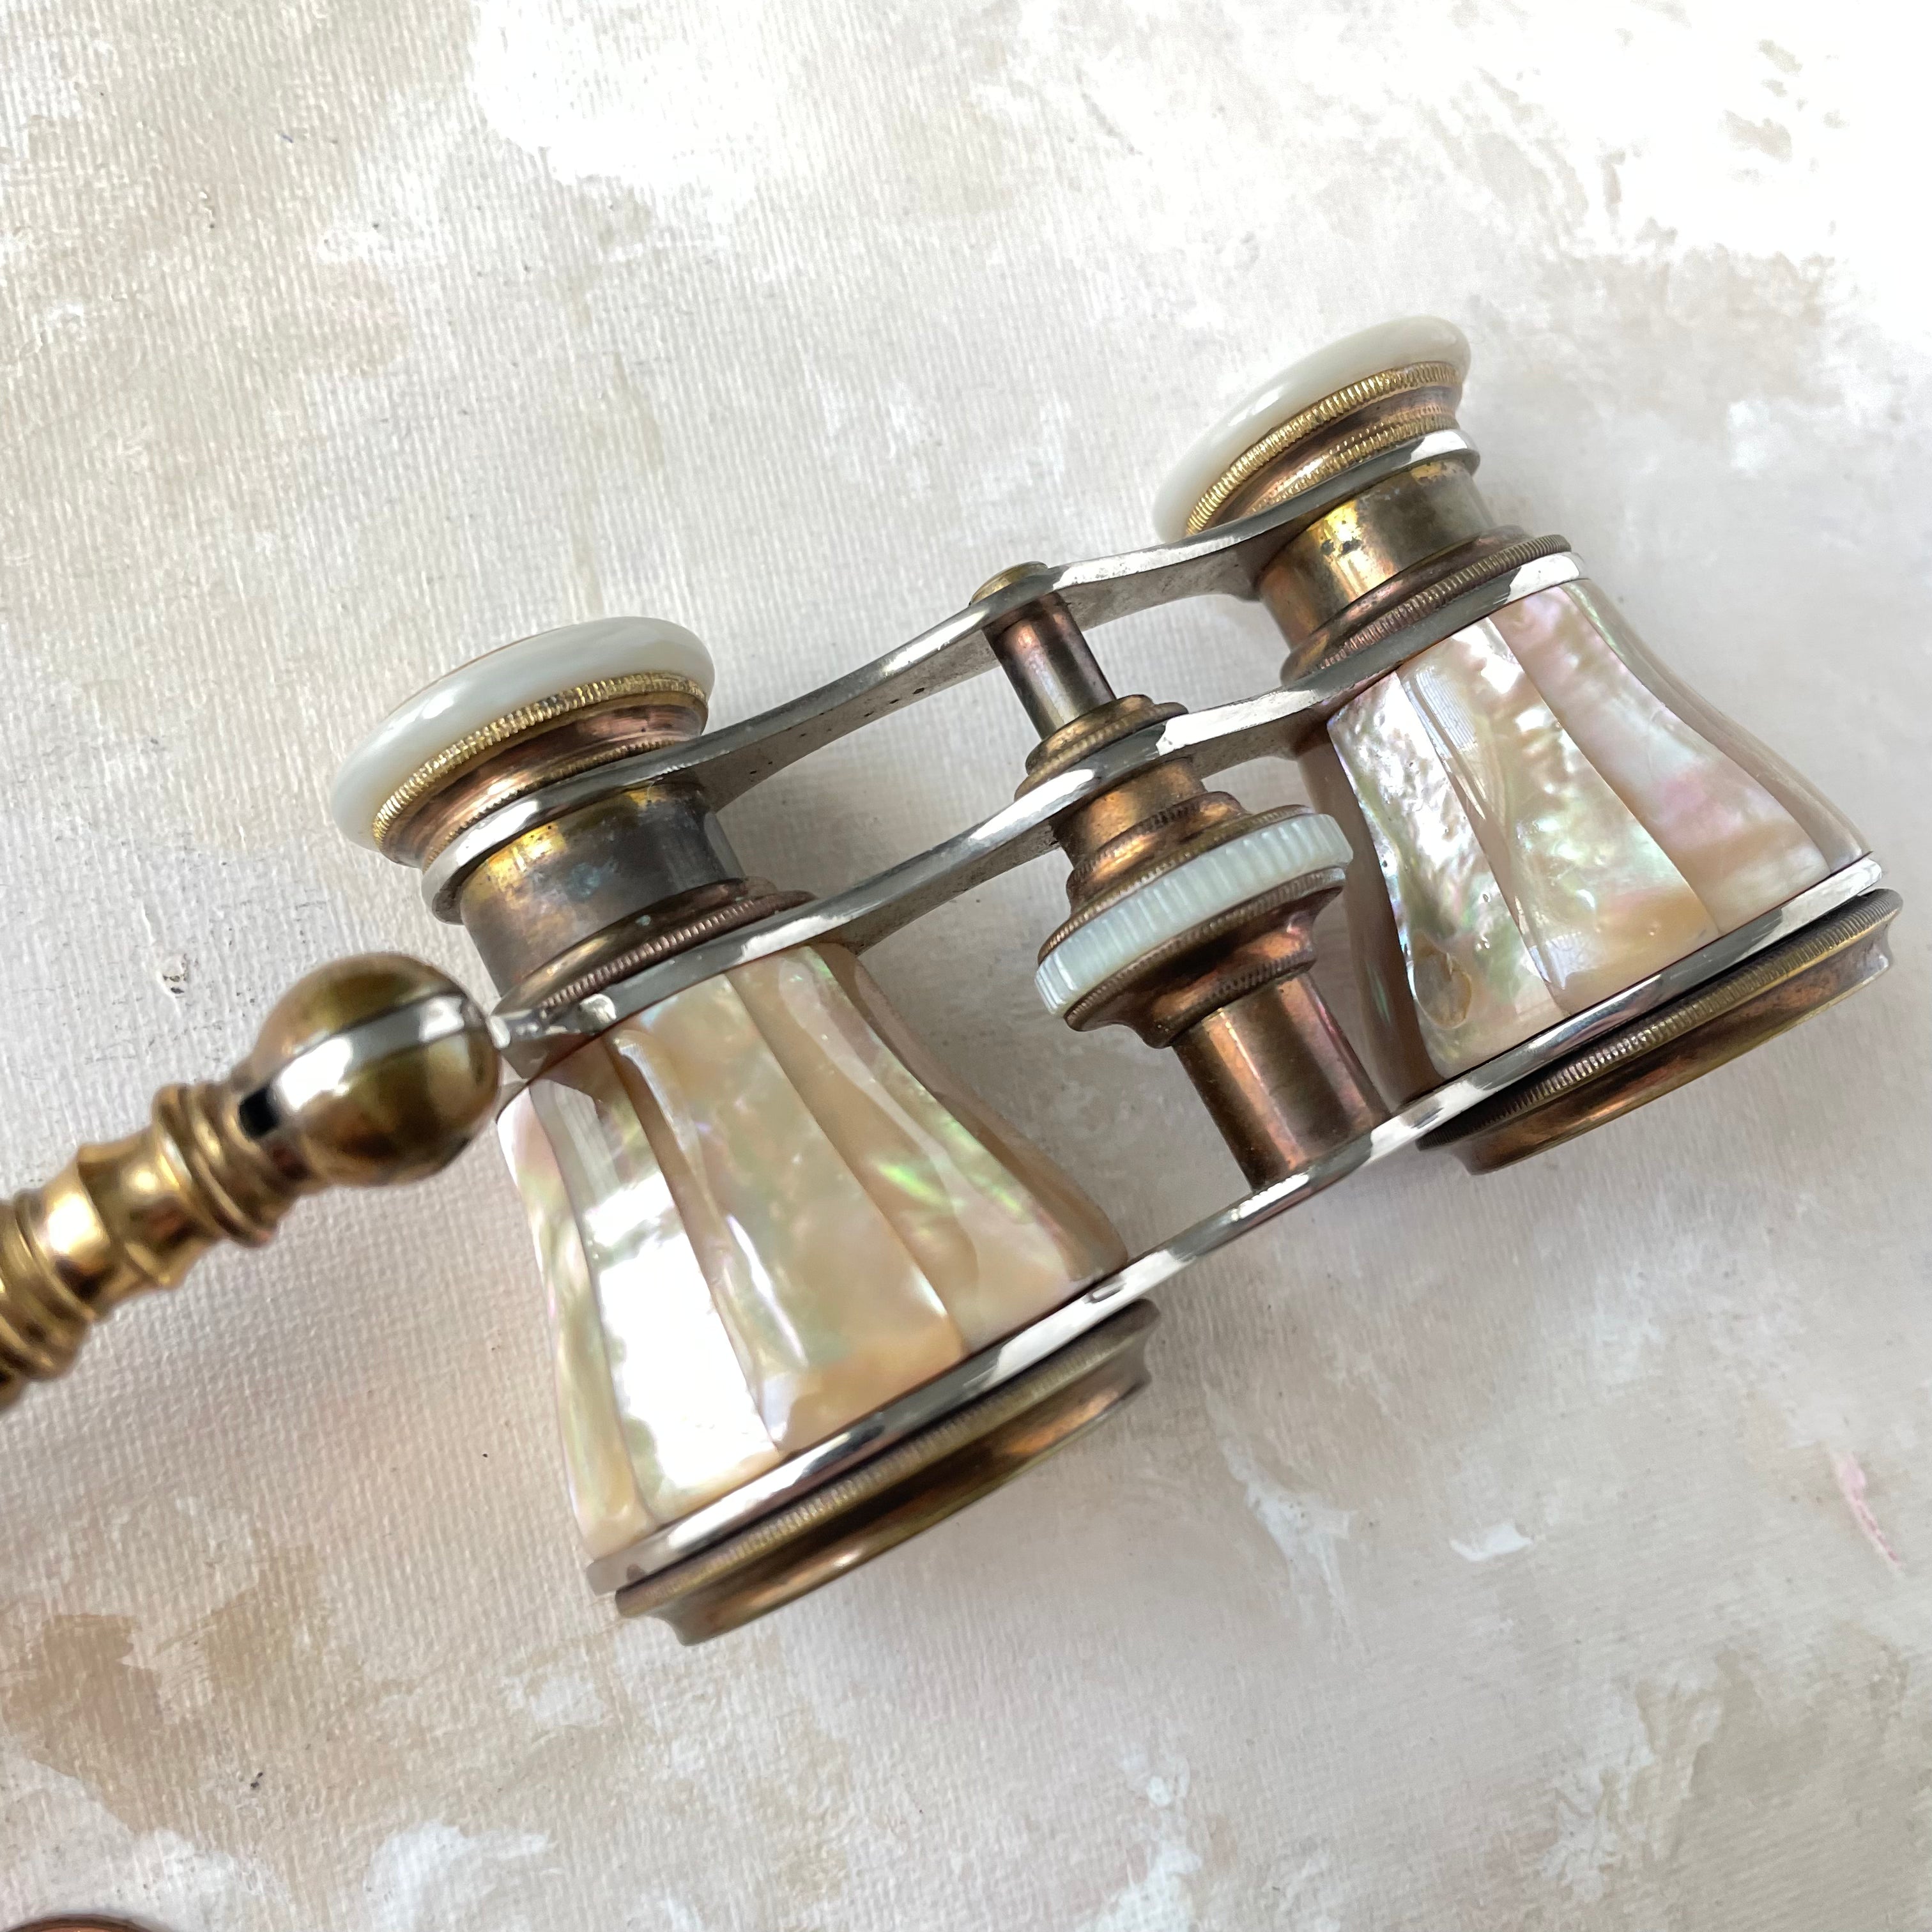 Gold Mother of Pearl Opera Glasses with Handle -  Opera Glasses